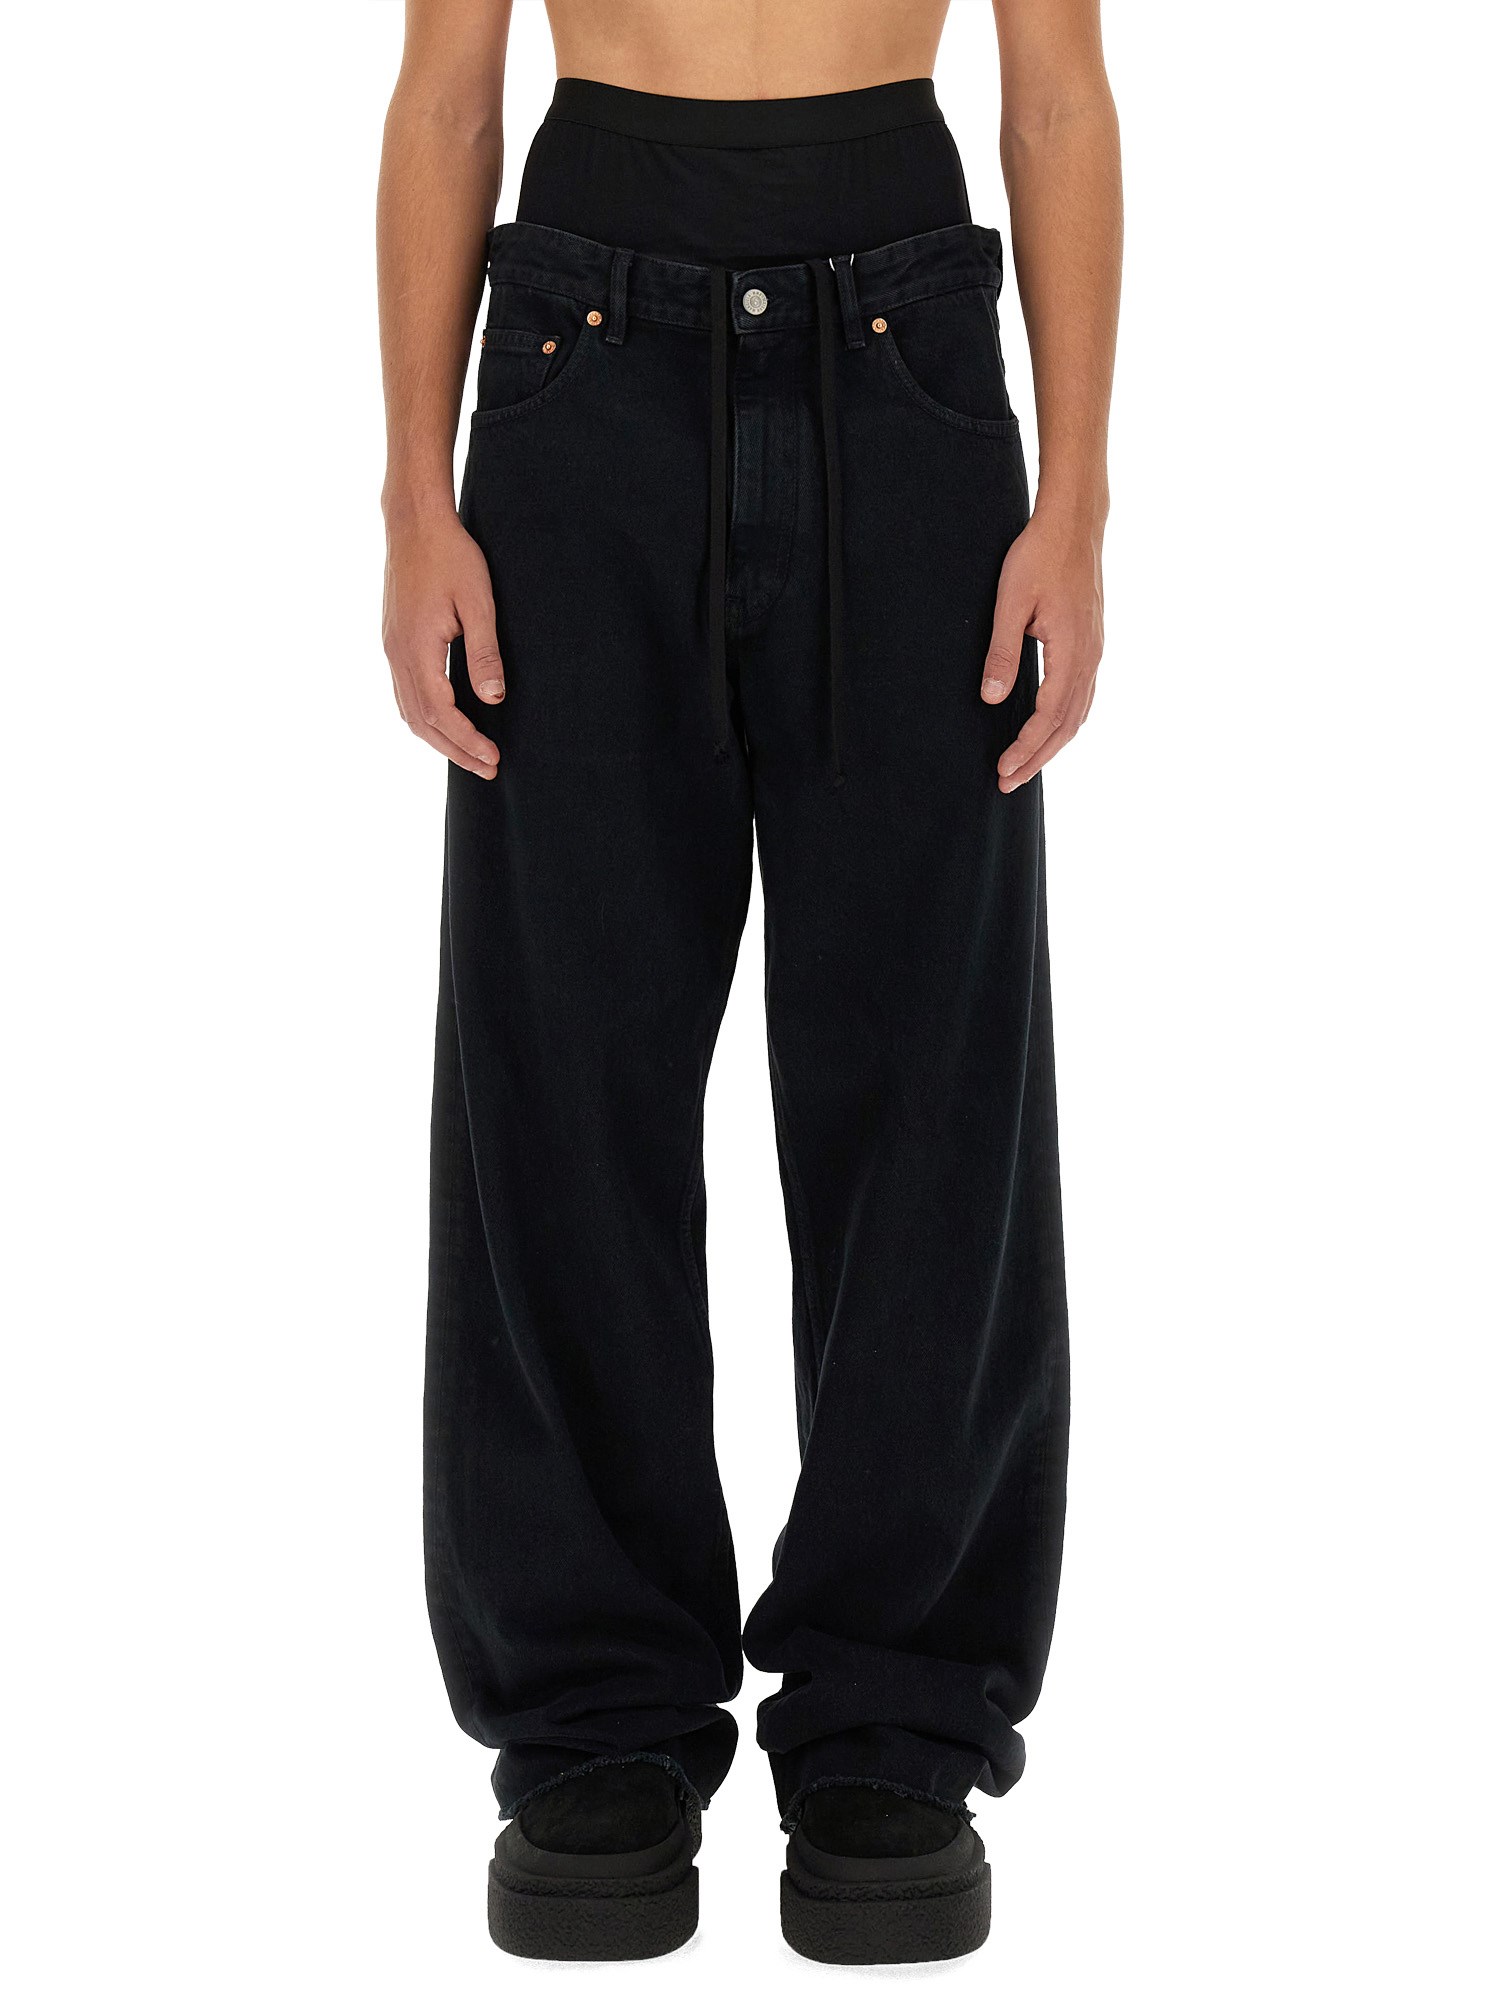 Mm6 Maison Margiela Jeans Layered Effect In Black